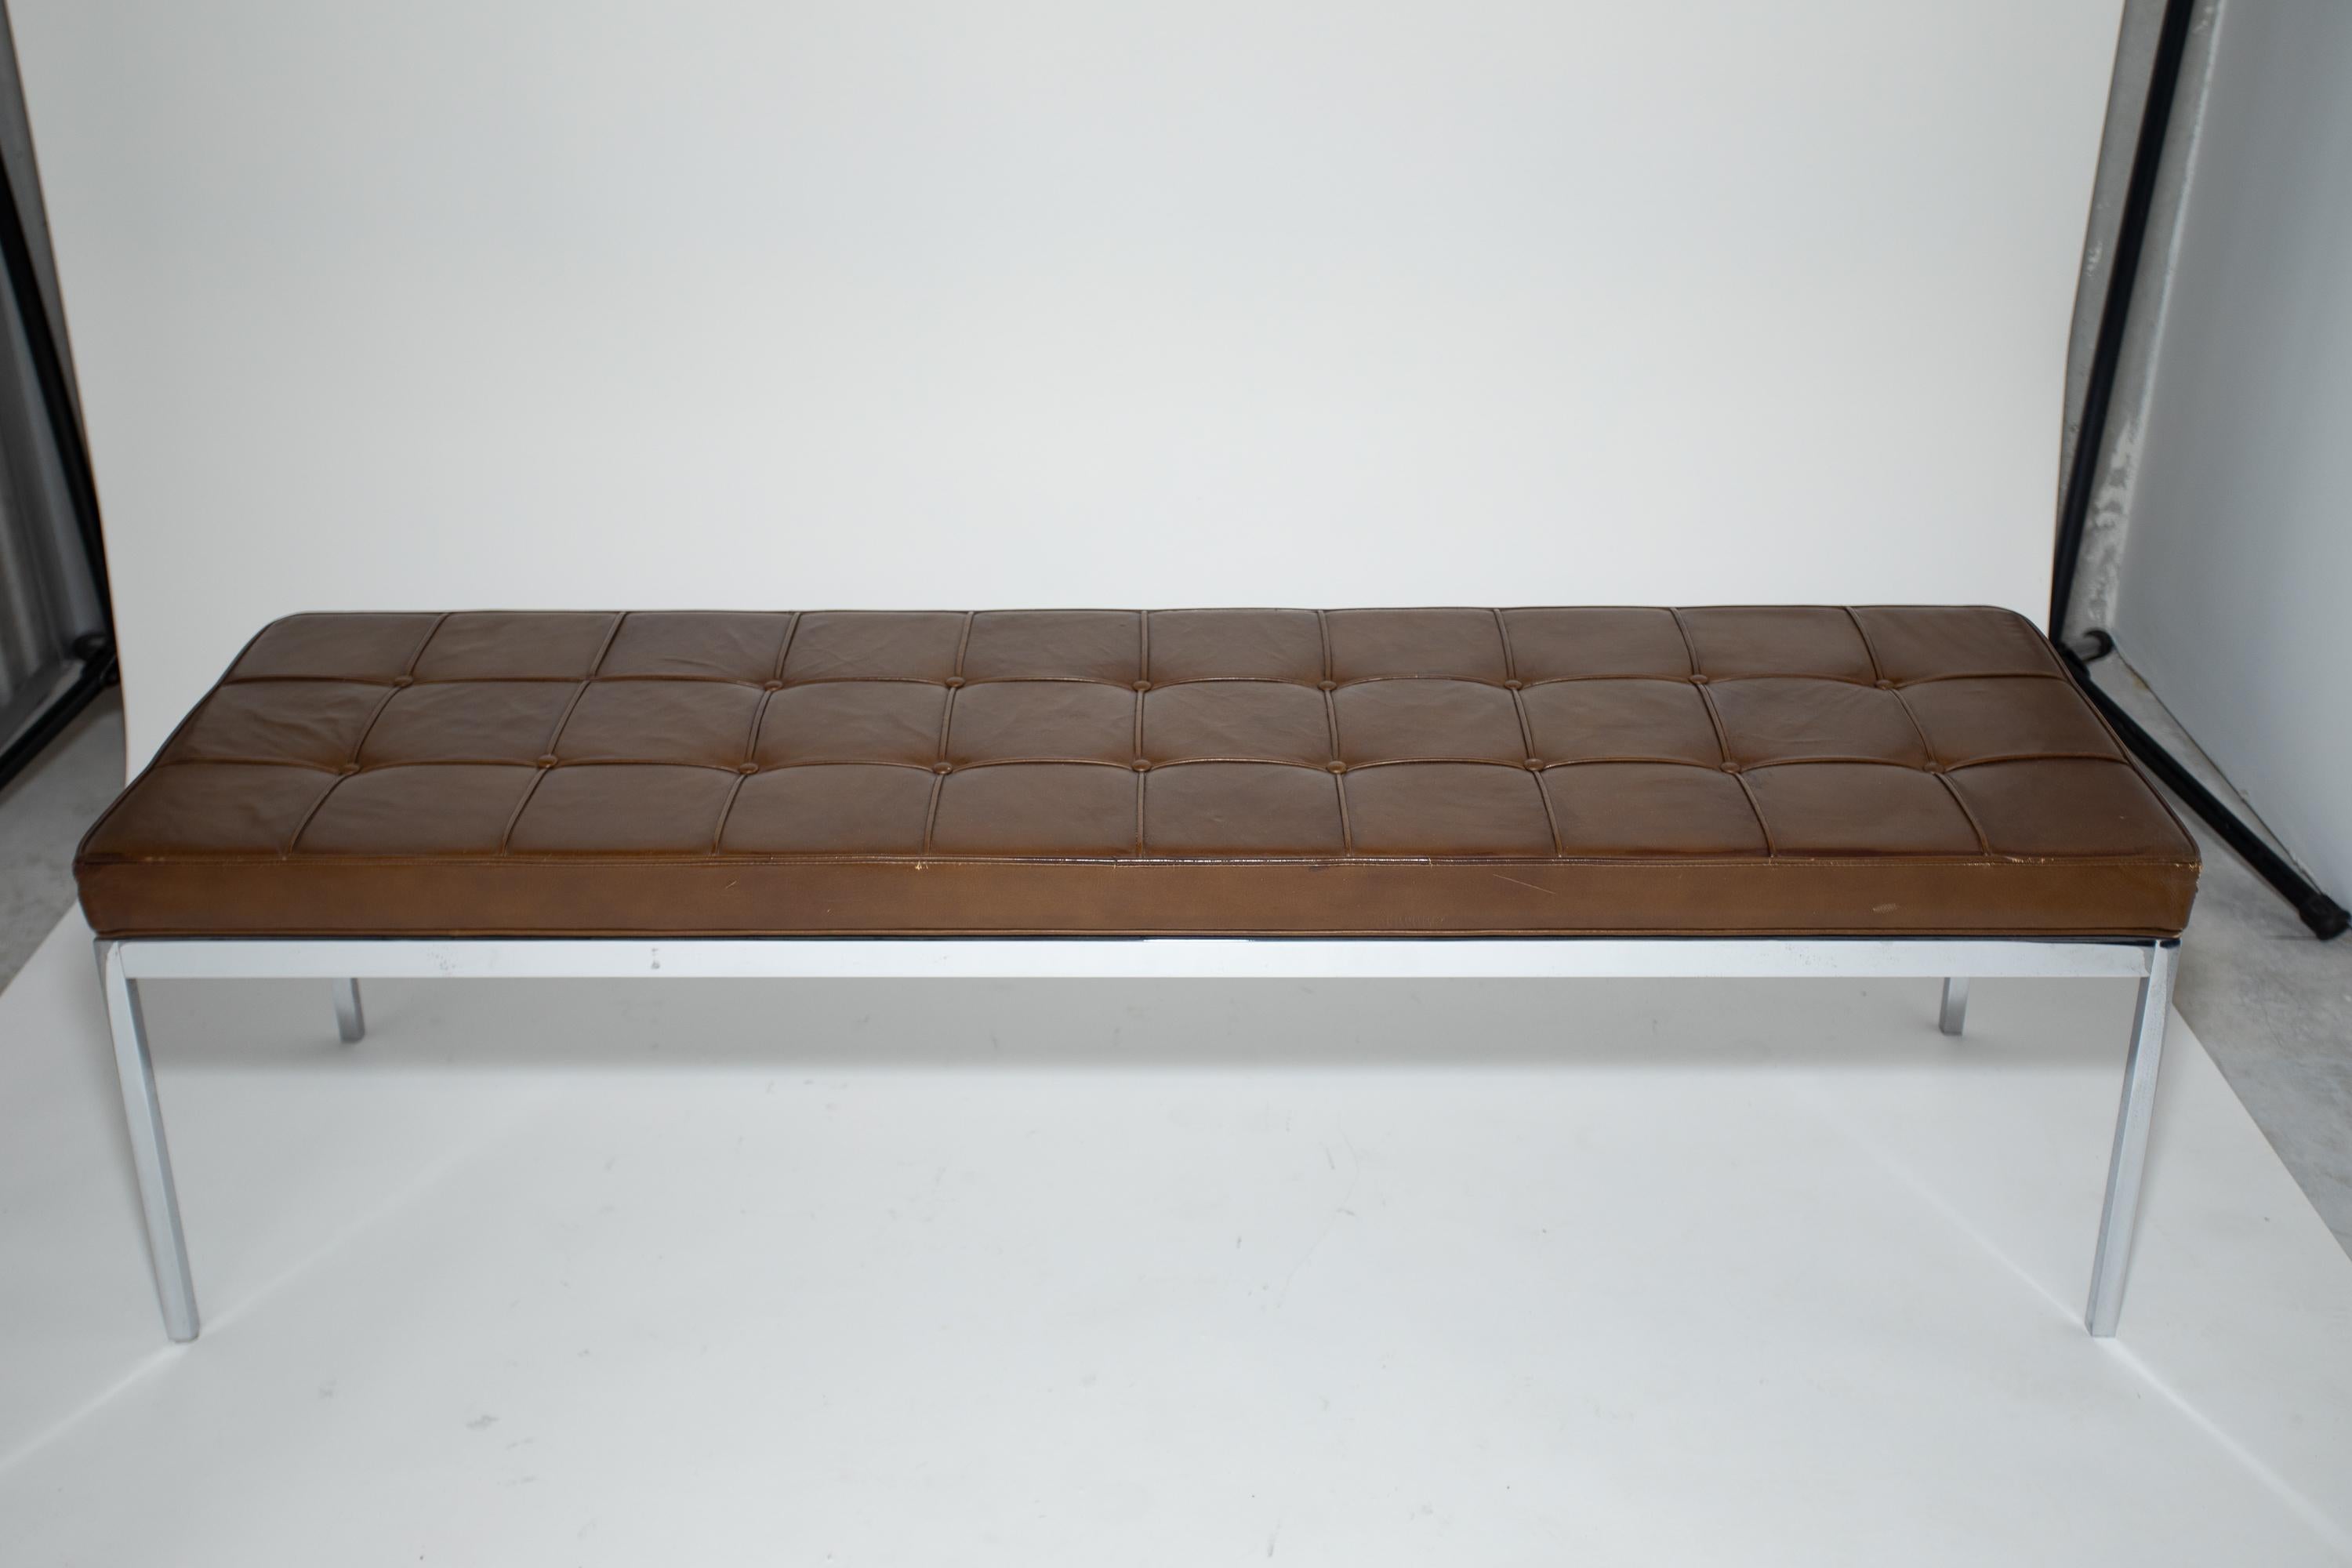 Florence Knoll Dark Brown Button Tufted Bench
Good original surface
Manufacturers label present